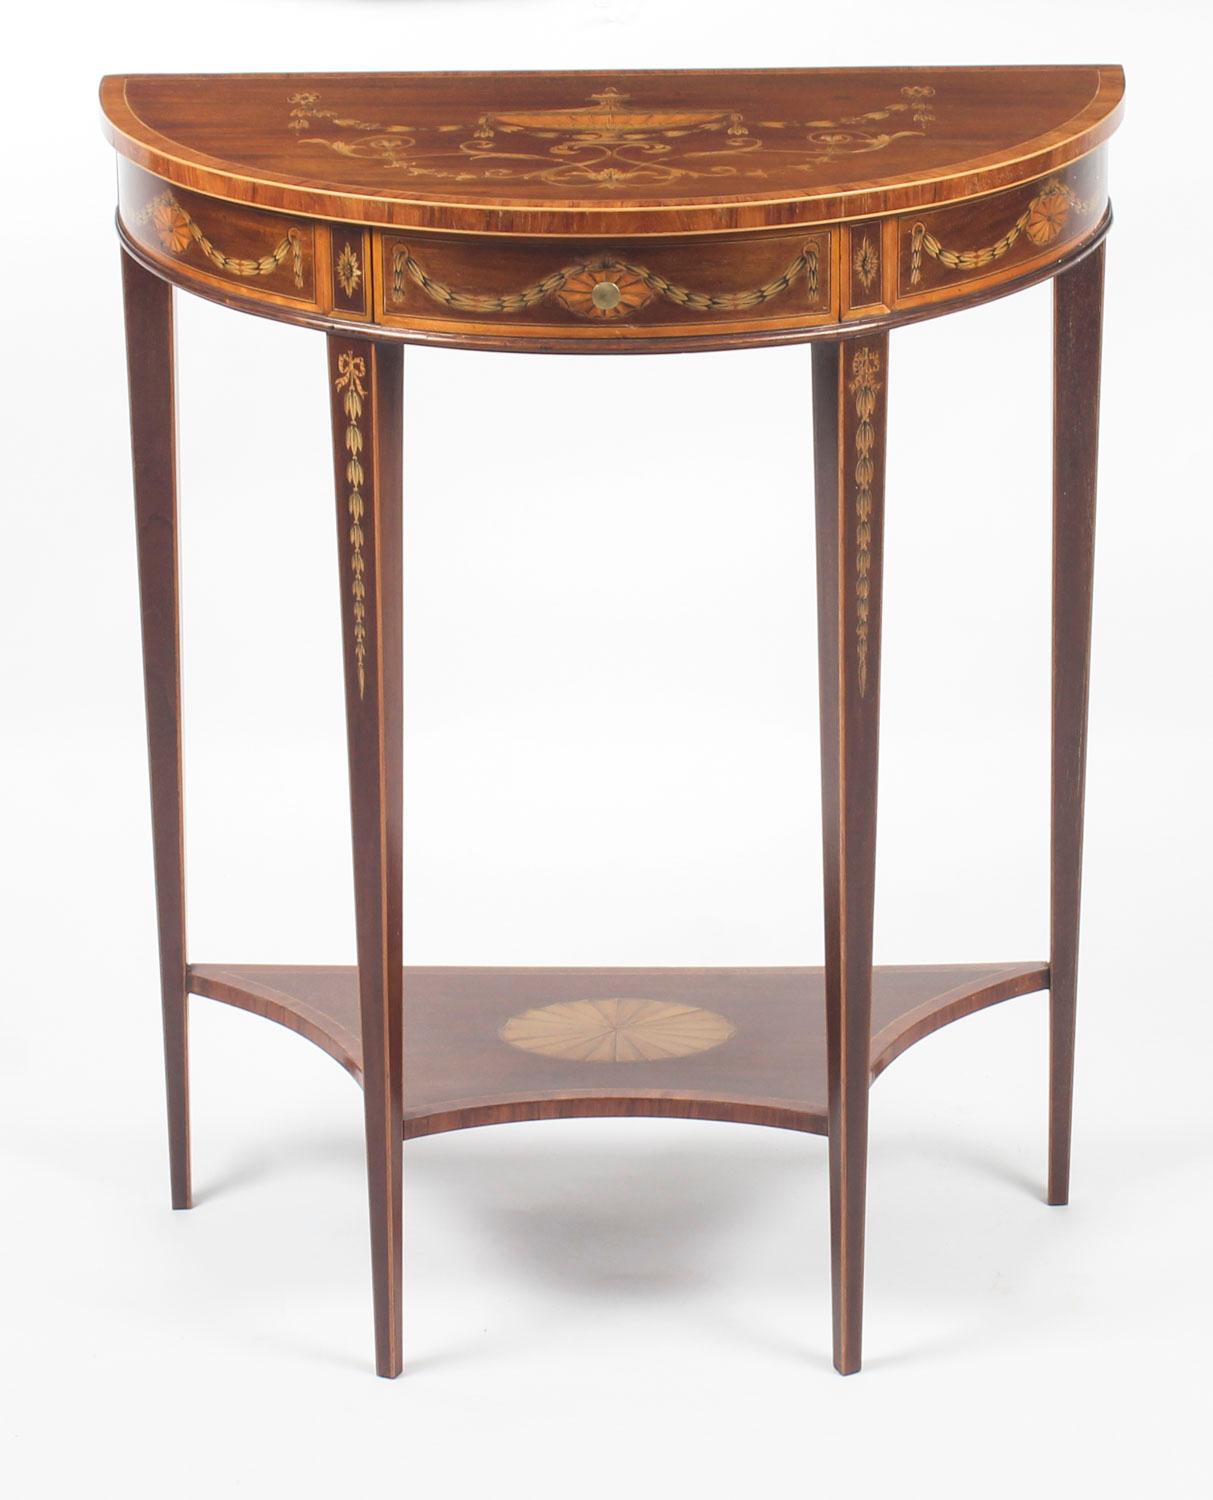 This is a beautiful antique near pair of English Regency Revival mahogany and marquetry demilune console tables, late 19th century in date.

The half-round table tops are beautifully framed with a satinwood border and have a finely inlaid